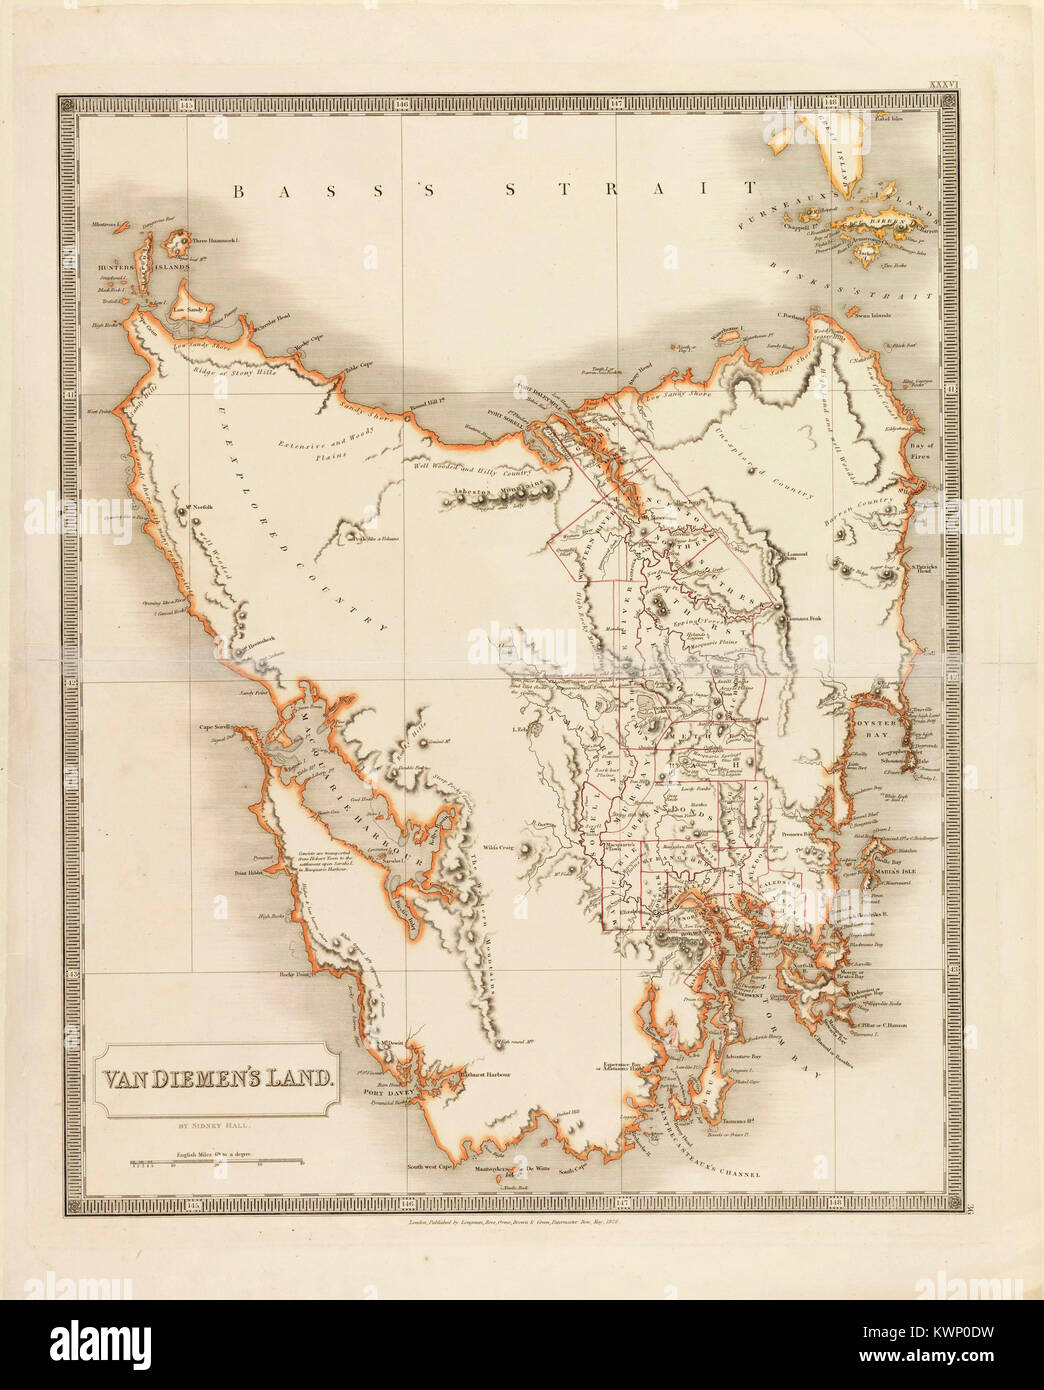 Van Diemen's Land was the original name used by most Europeans for the island of Tasmania, now part of Australia. The name was changed from Van Diemen's Land to Tasmania in 1856. Stock Photo